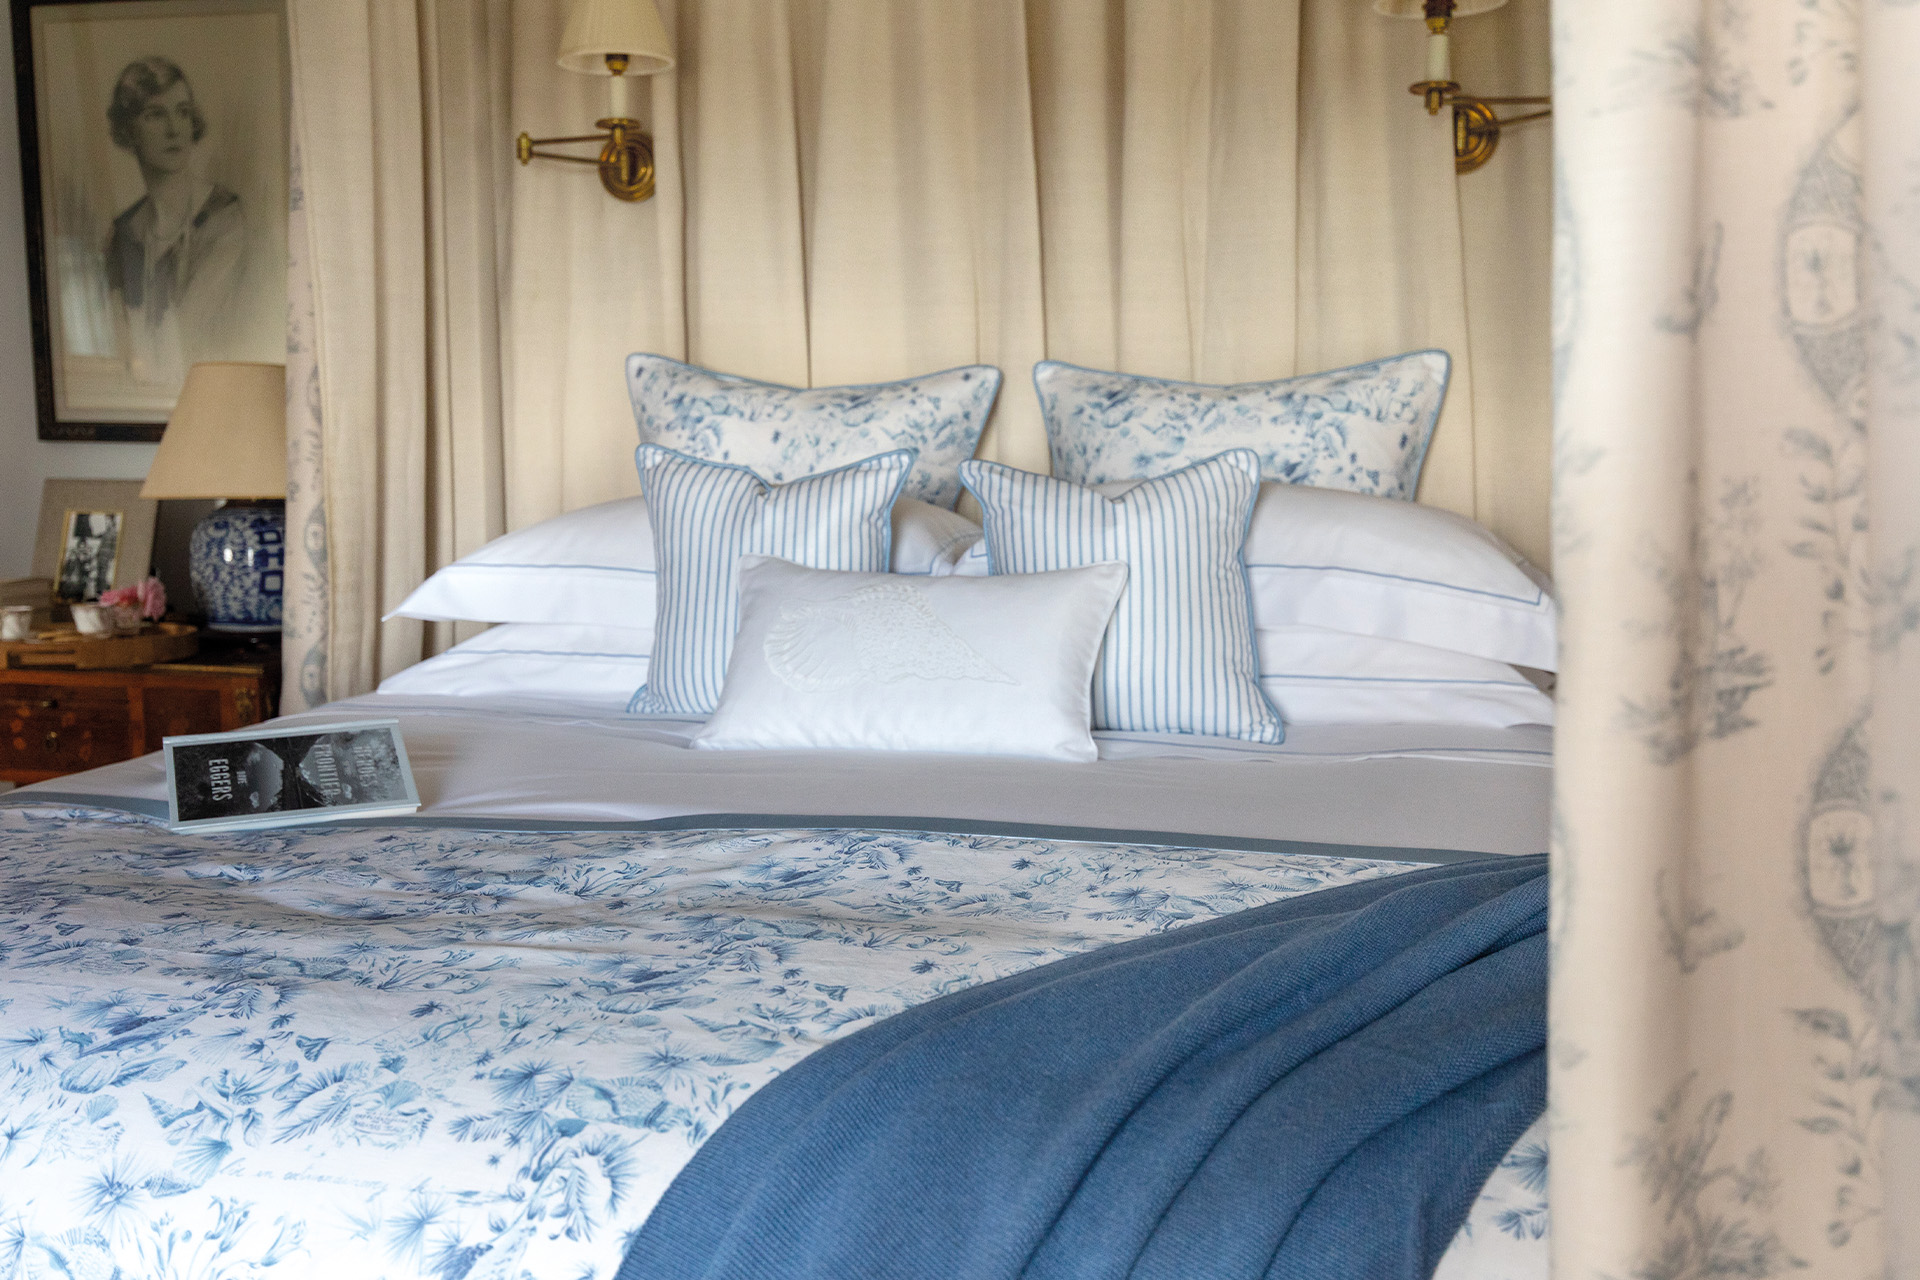 Heirlooms: Bespoke Linens Created With Care And Expertise